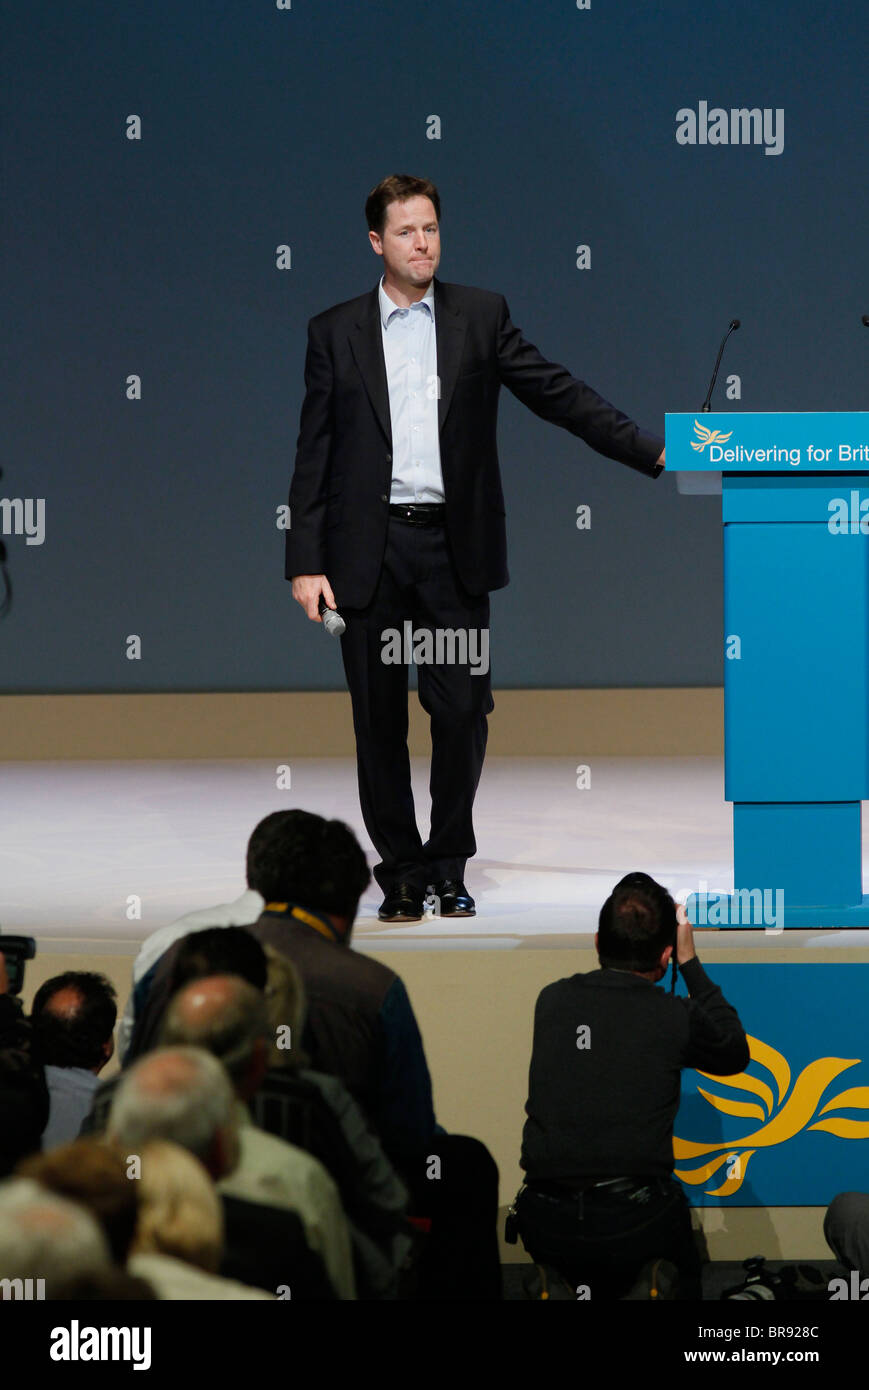 NICK CLEGG MP DEPUTY PRIME MINISTER 19 September 2010 THE ACC LIVERPOOL ENGLAND Stock Photo